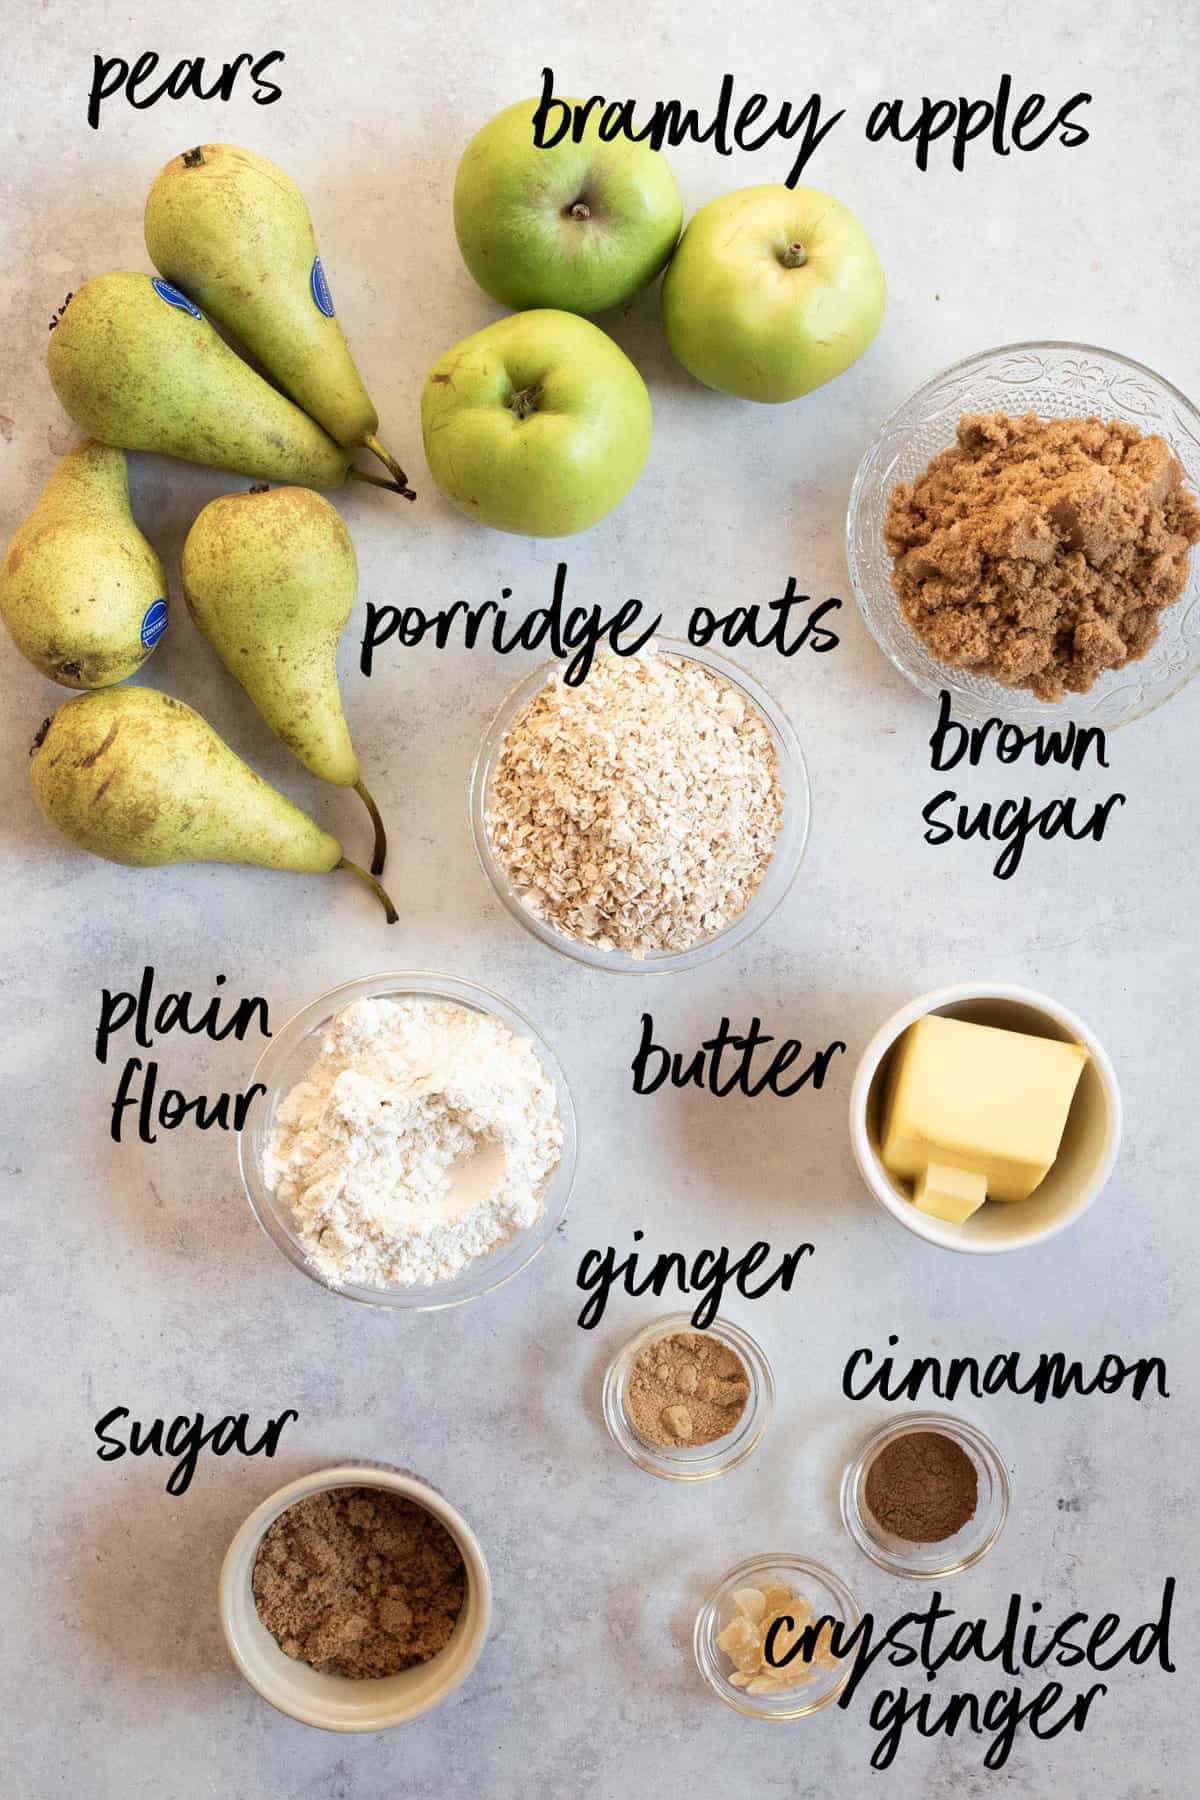 Ingredients for apple and pear crumble.